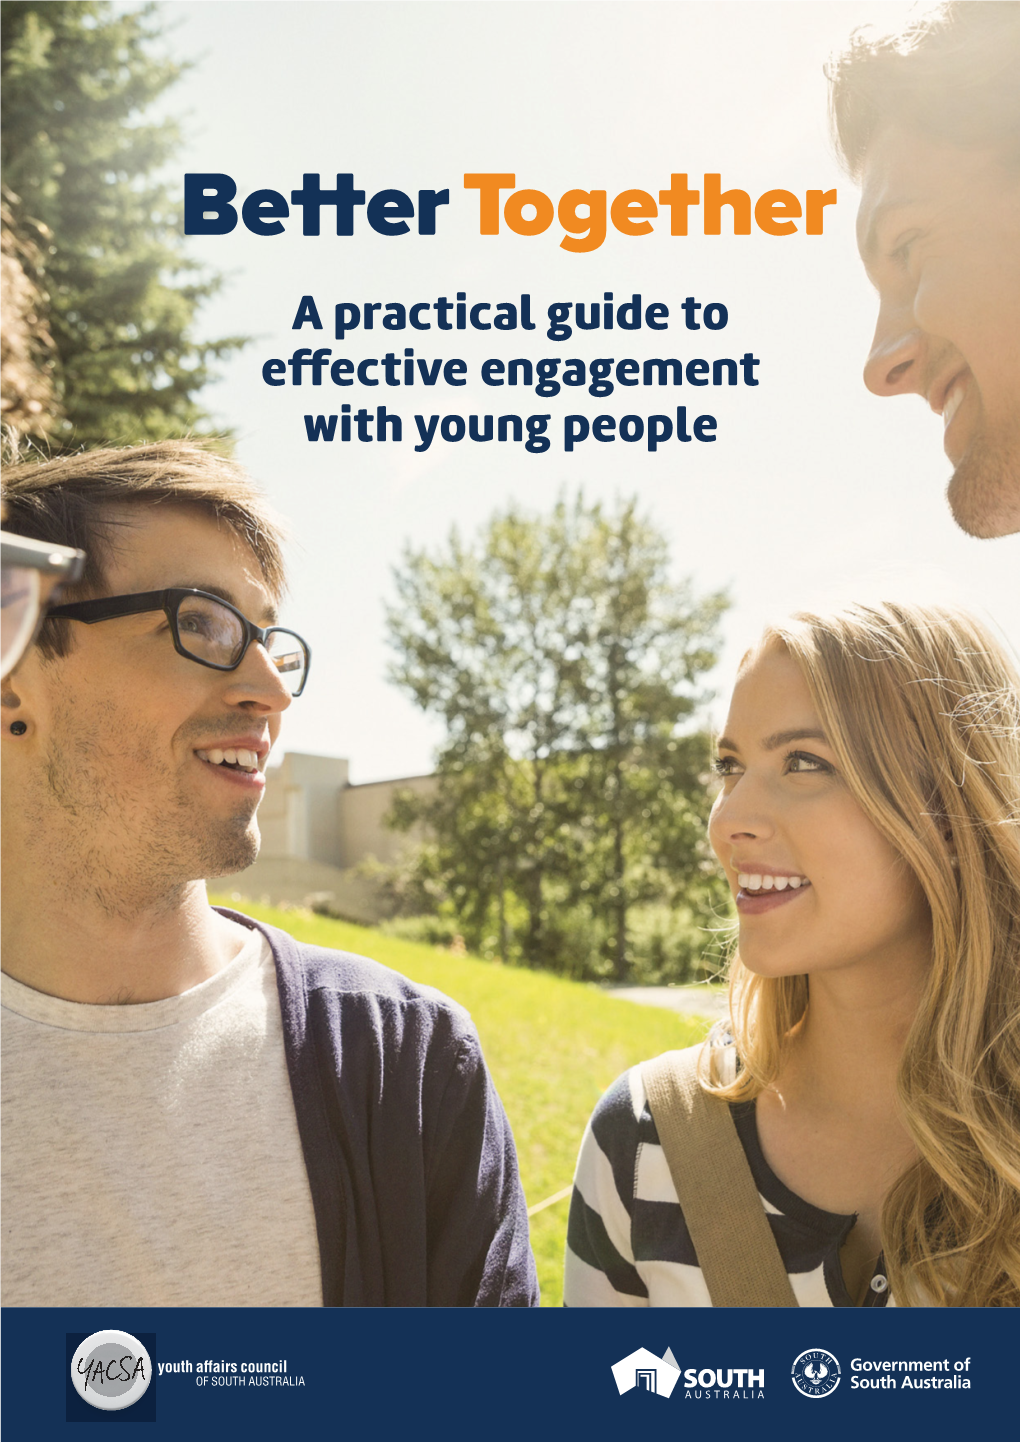 A Practical Guide to Effective Engagement with Young People